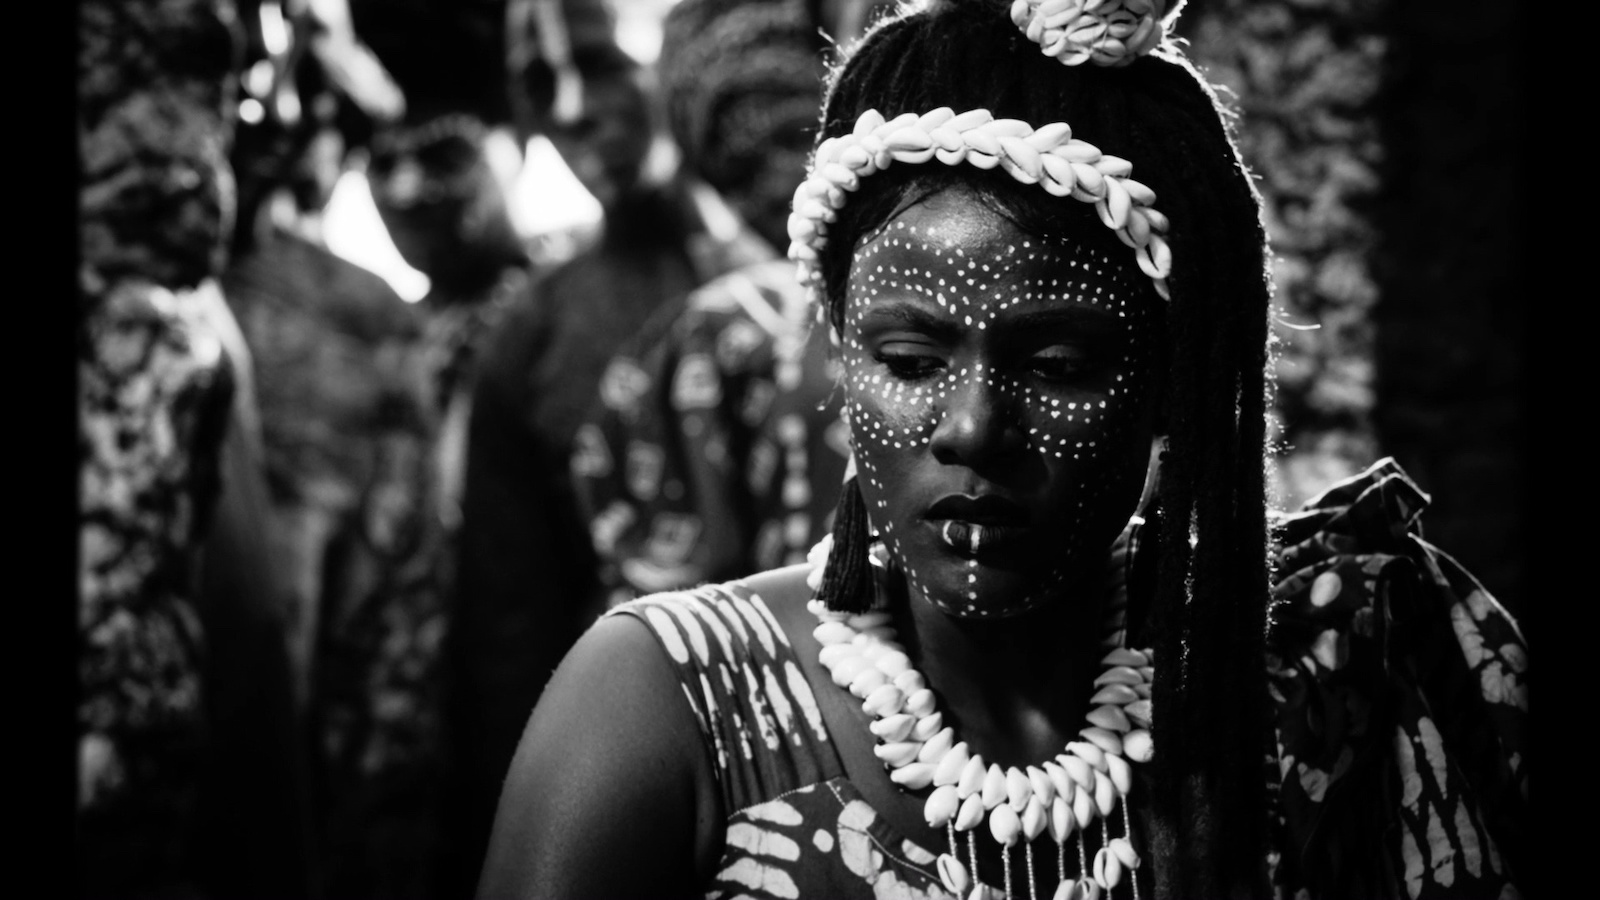 A woman in tribal makeup and headdress faces camera looking down